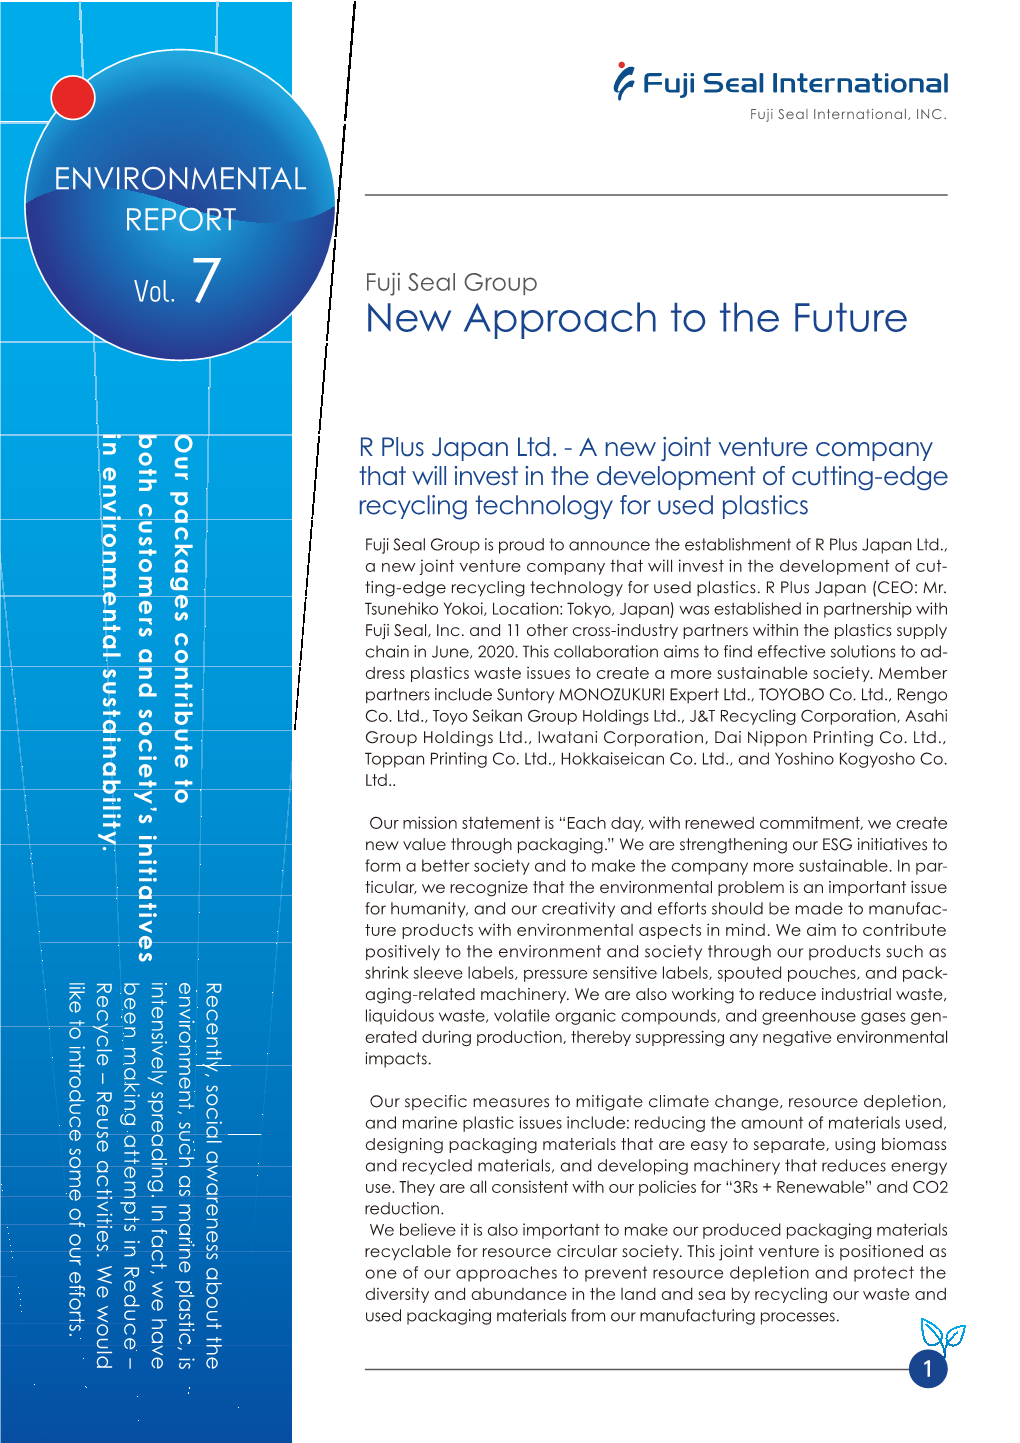 Fuji Seal Group Environment Report Vol.7 / New Approach to the Future